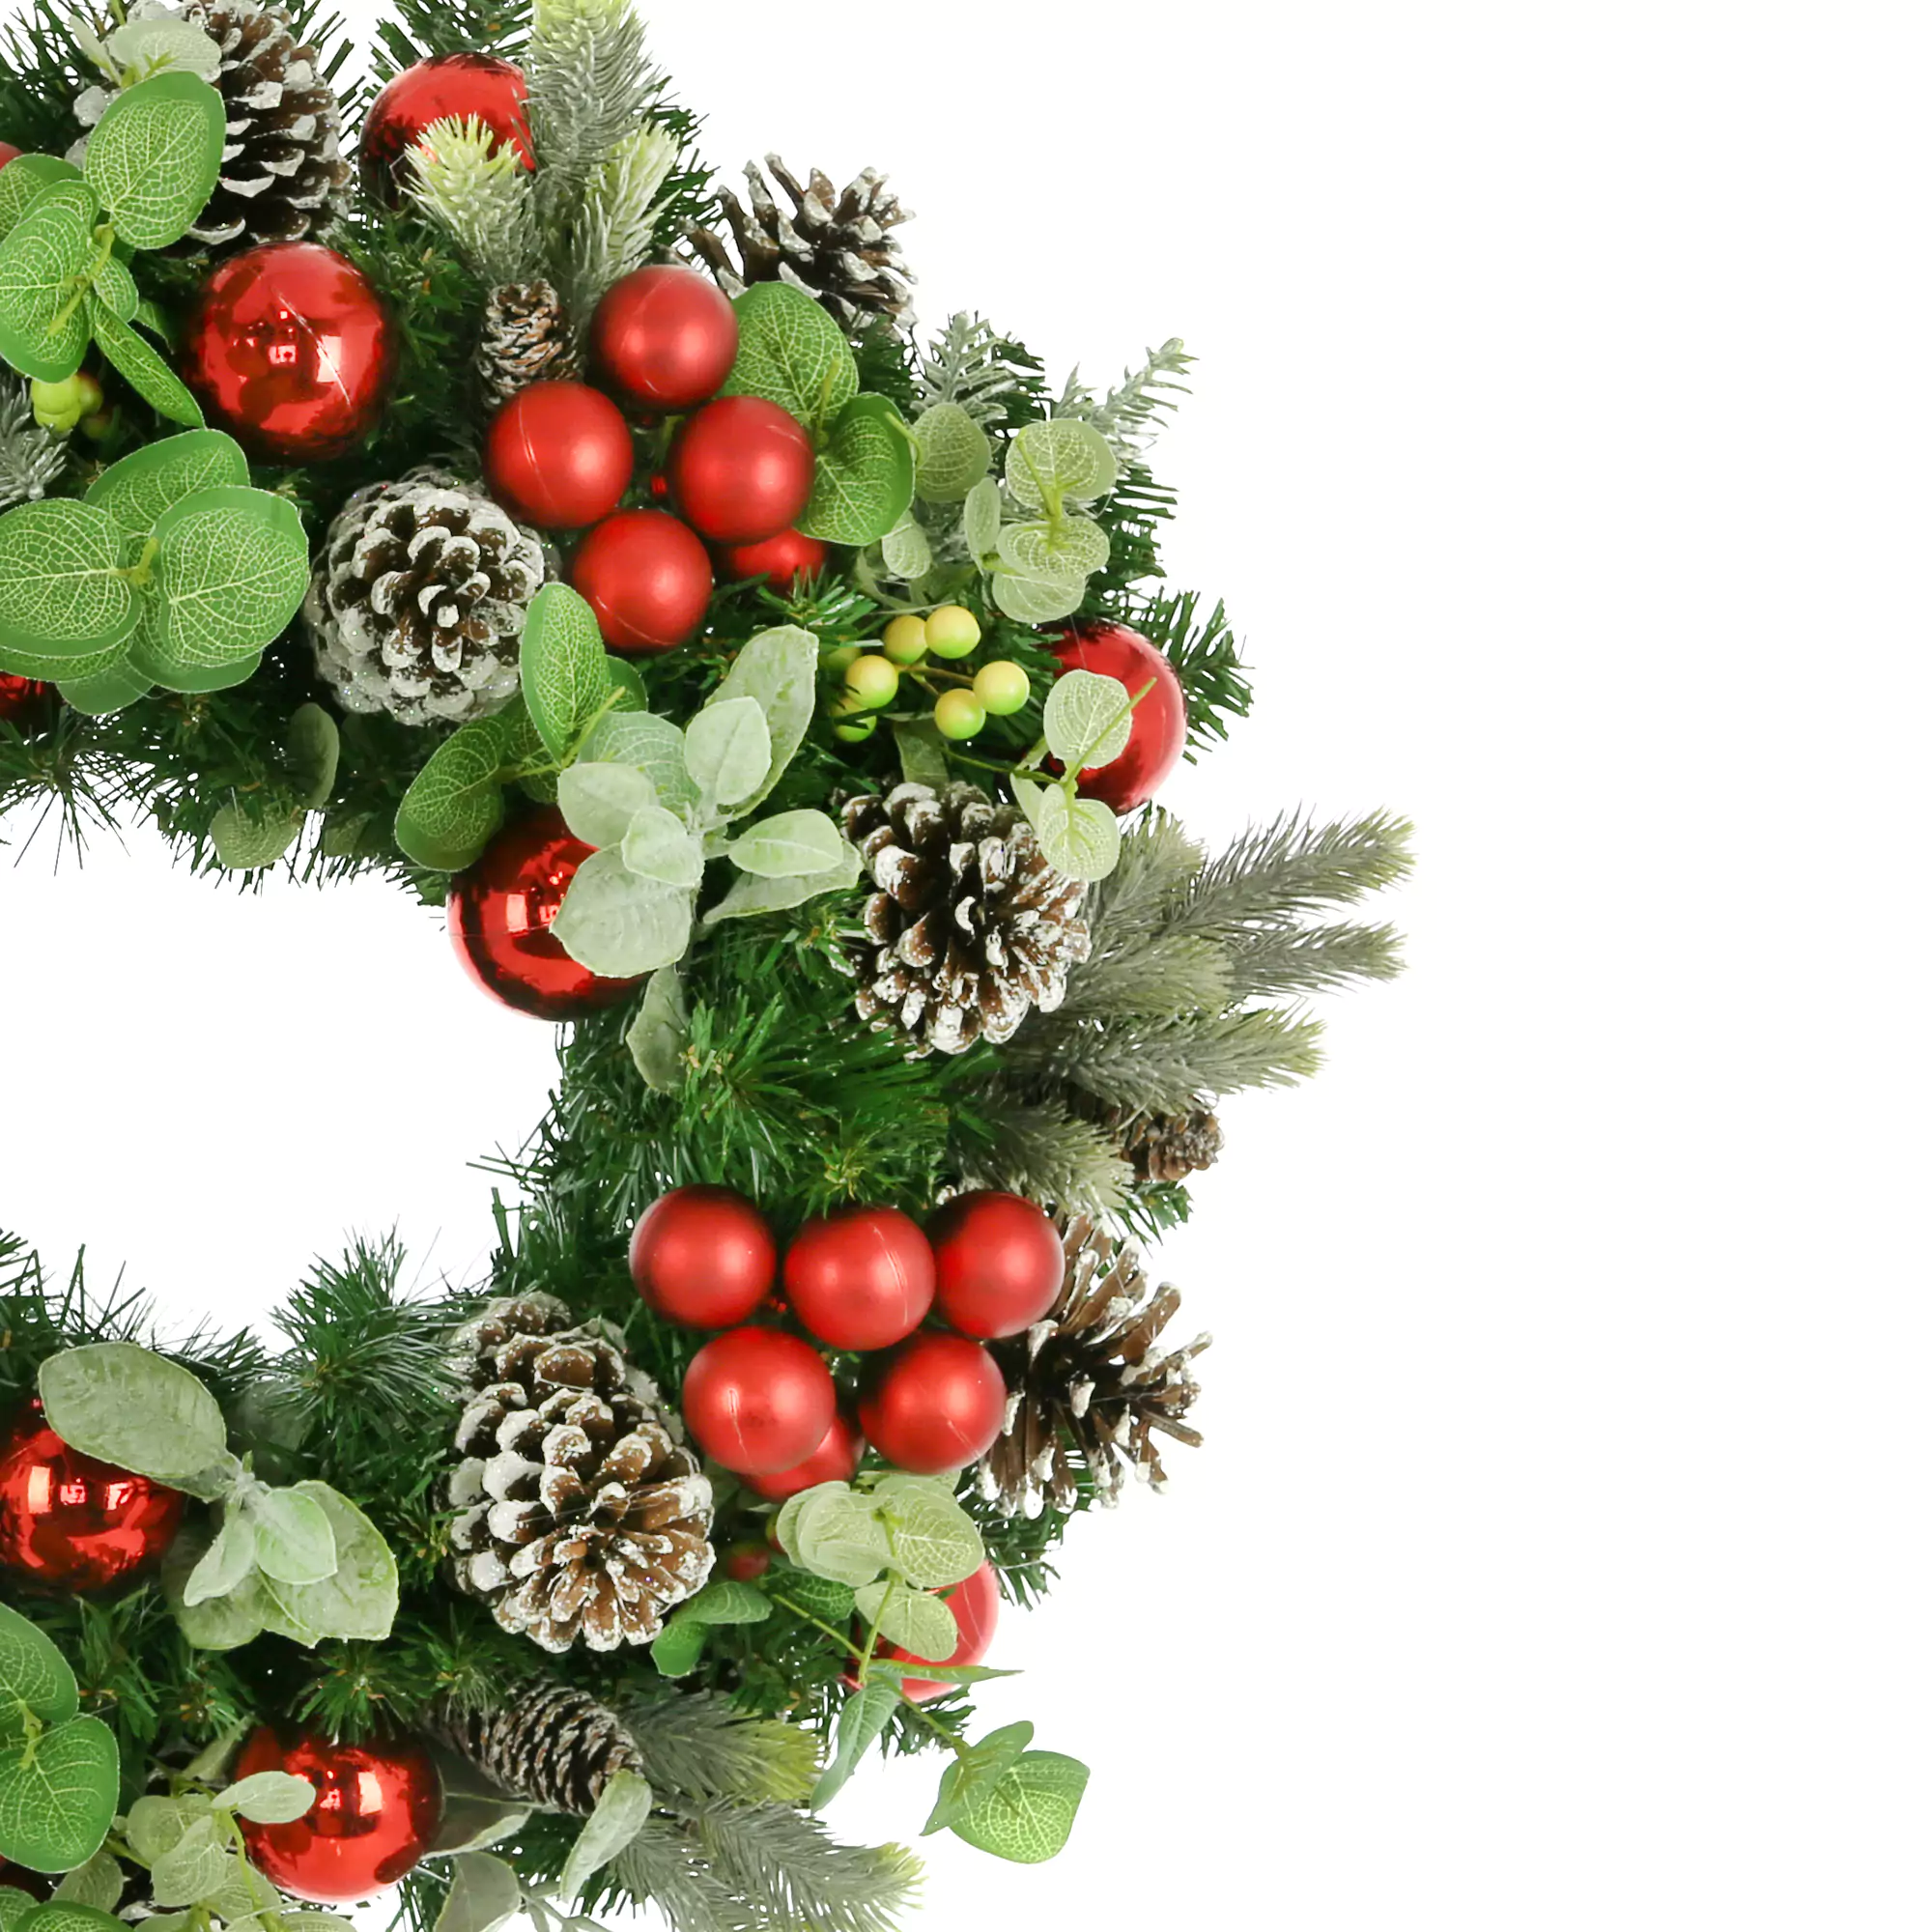 26" Holiday Evergreen Wreath with Pinecones, Berries and Ornaments